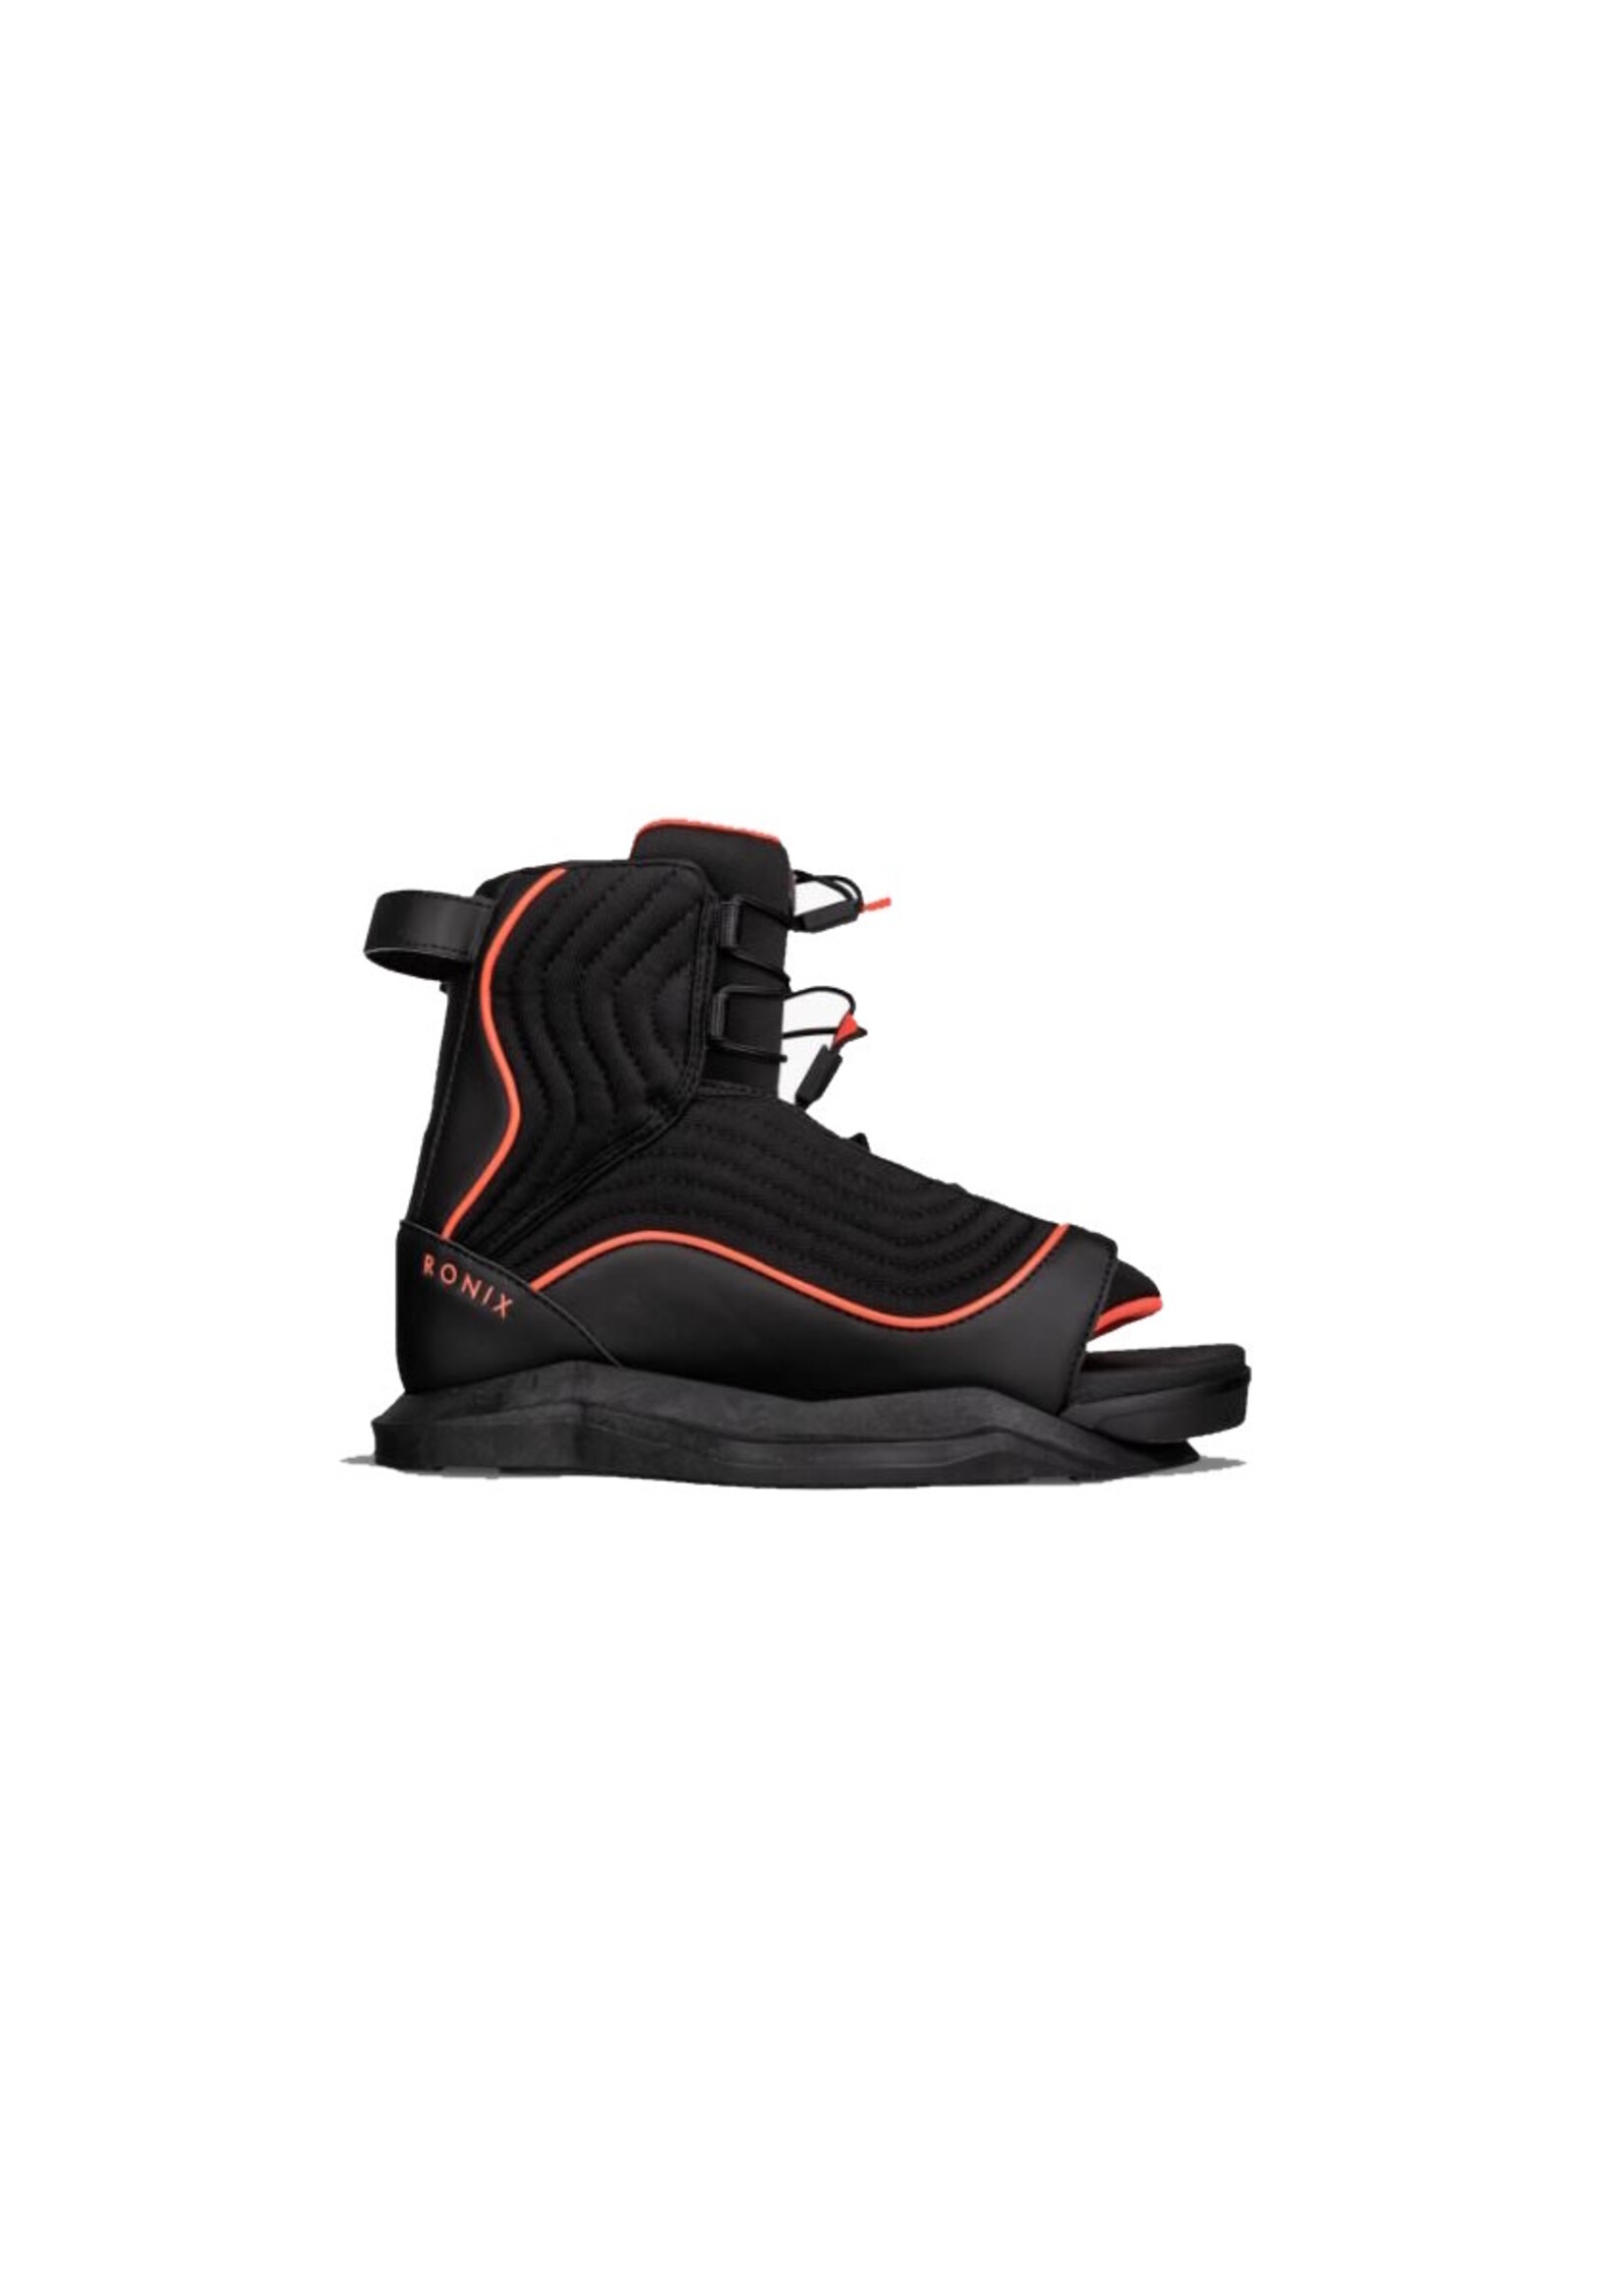 Ronix Luxe Boot